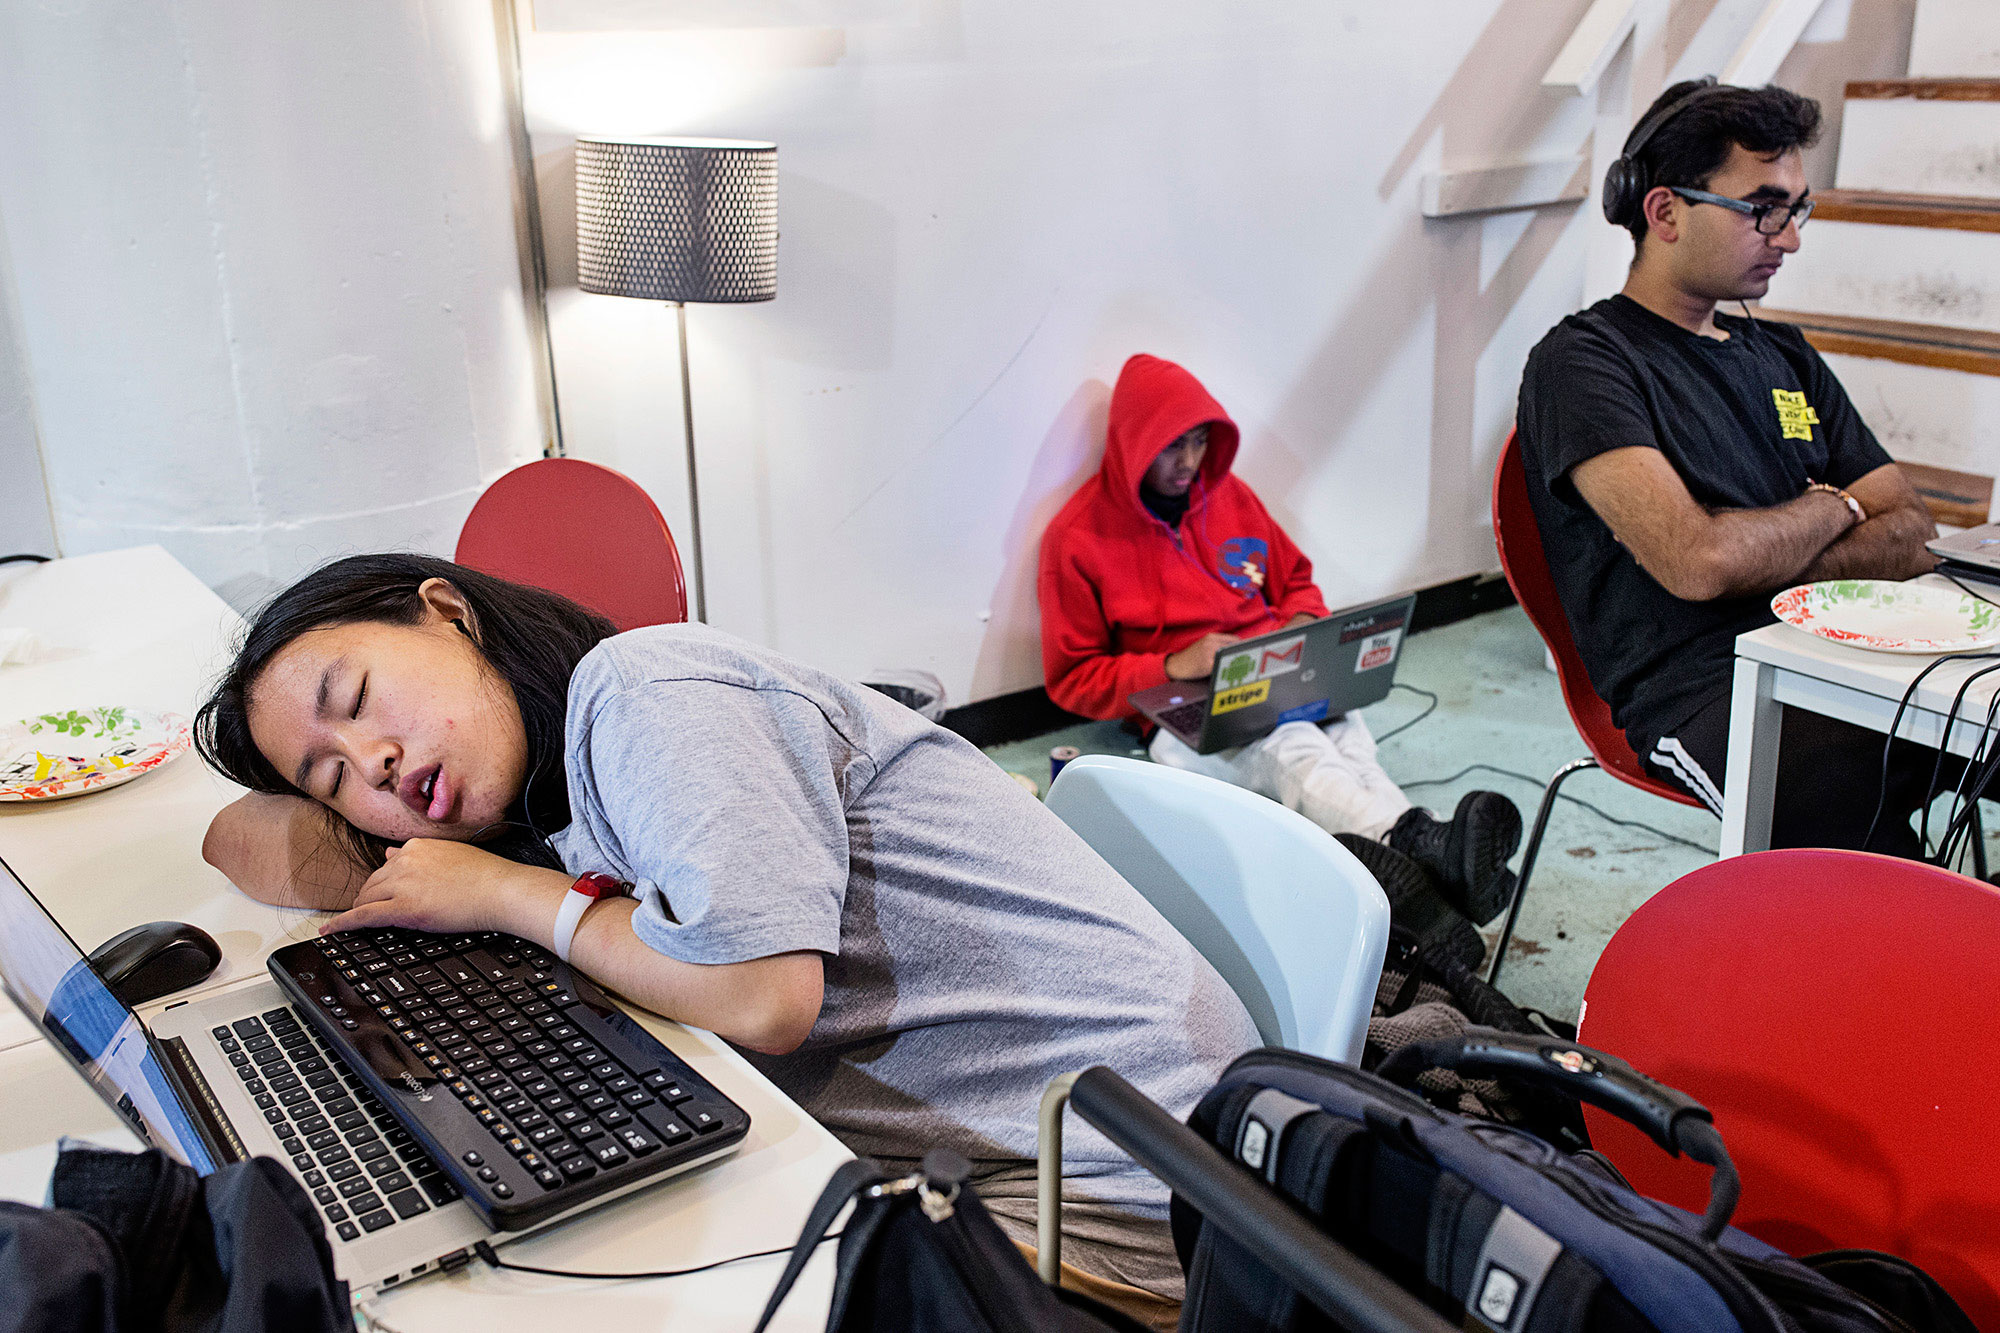 A participant in a hackathon organized by the company Shirts.io takes a nap at her computer in the middle of the night at Citizen Space in San Francisco, Calif., on Saturday, August 16, 2014. From the series,  Wild West Tech.